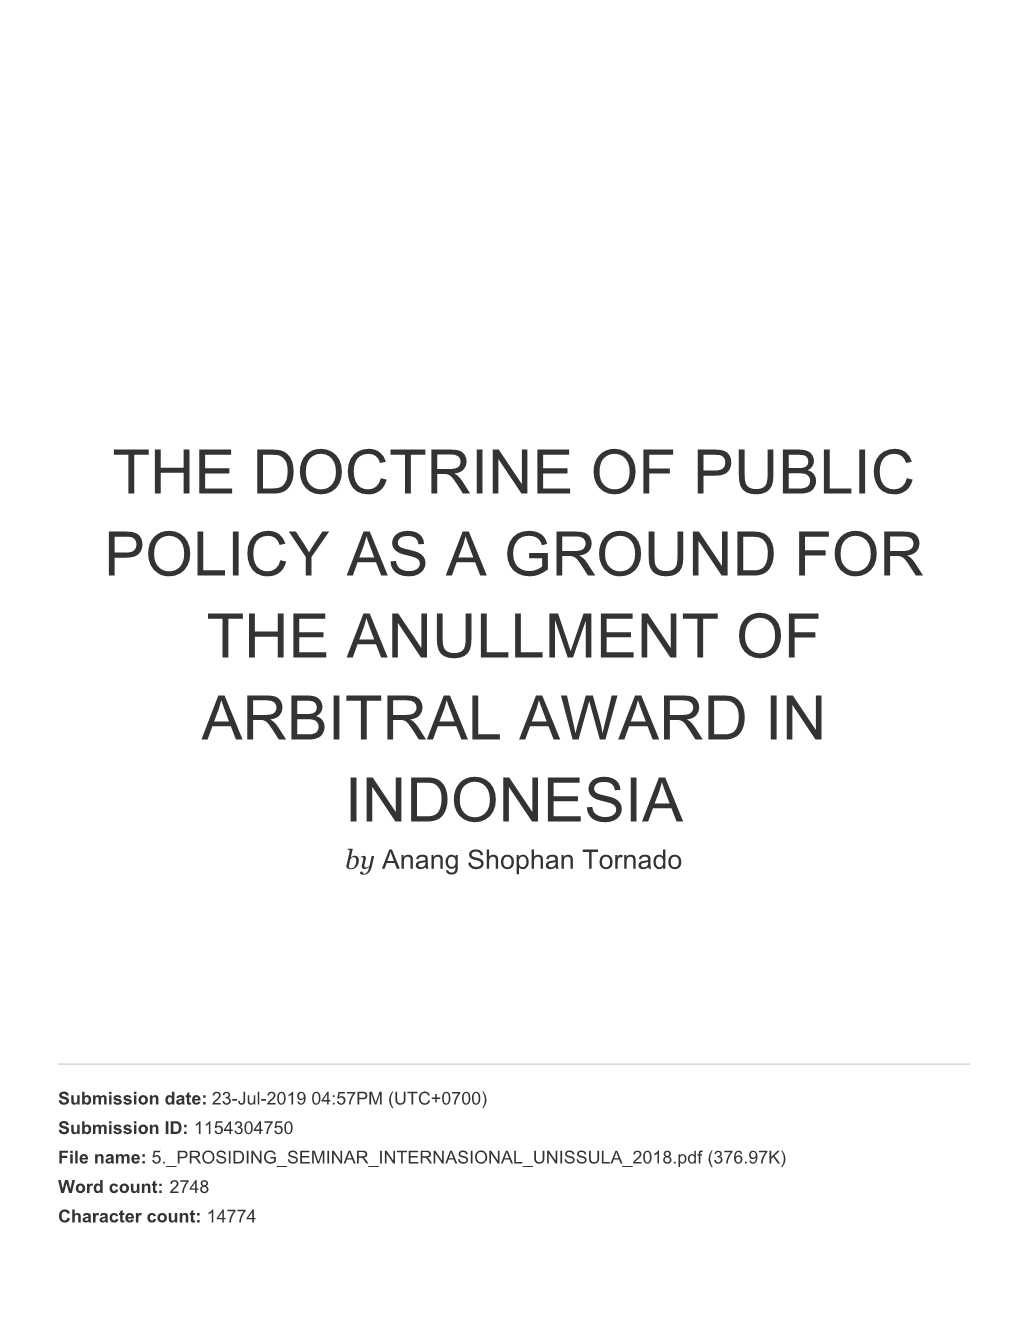 THE DOCTRINE of PUBLIC POLICY AS a GROUND for the ANULLMENT of ARBITRAL AWARD in INDONESIA by Anang Shophan Tornado